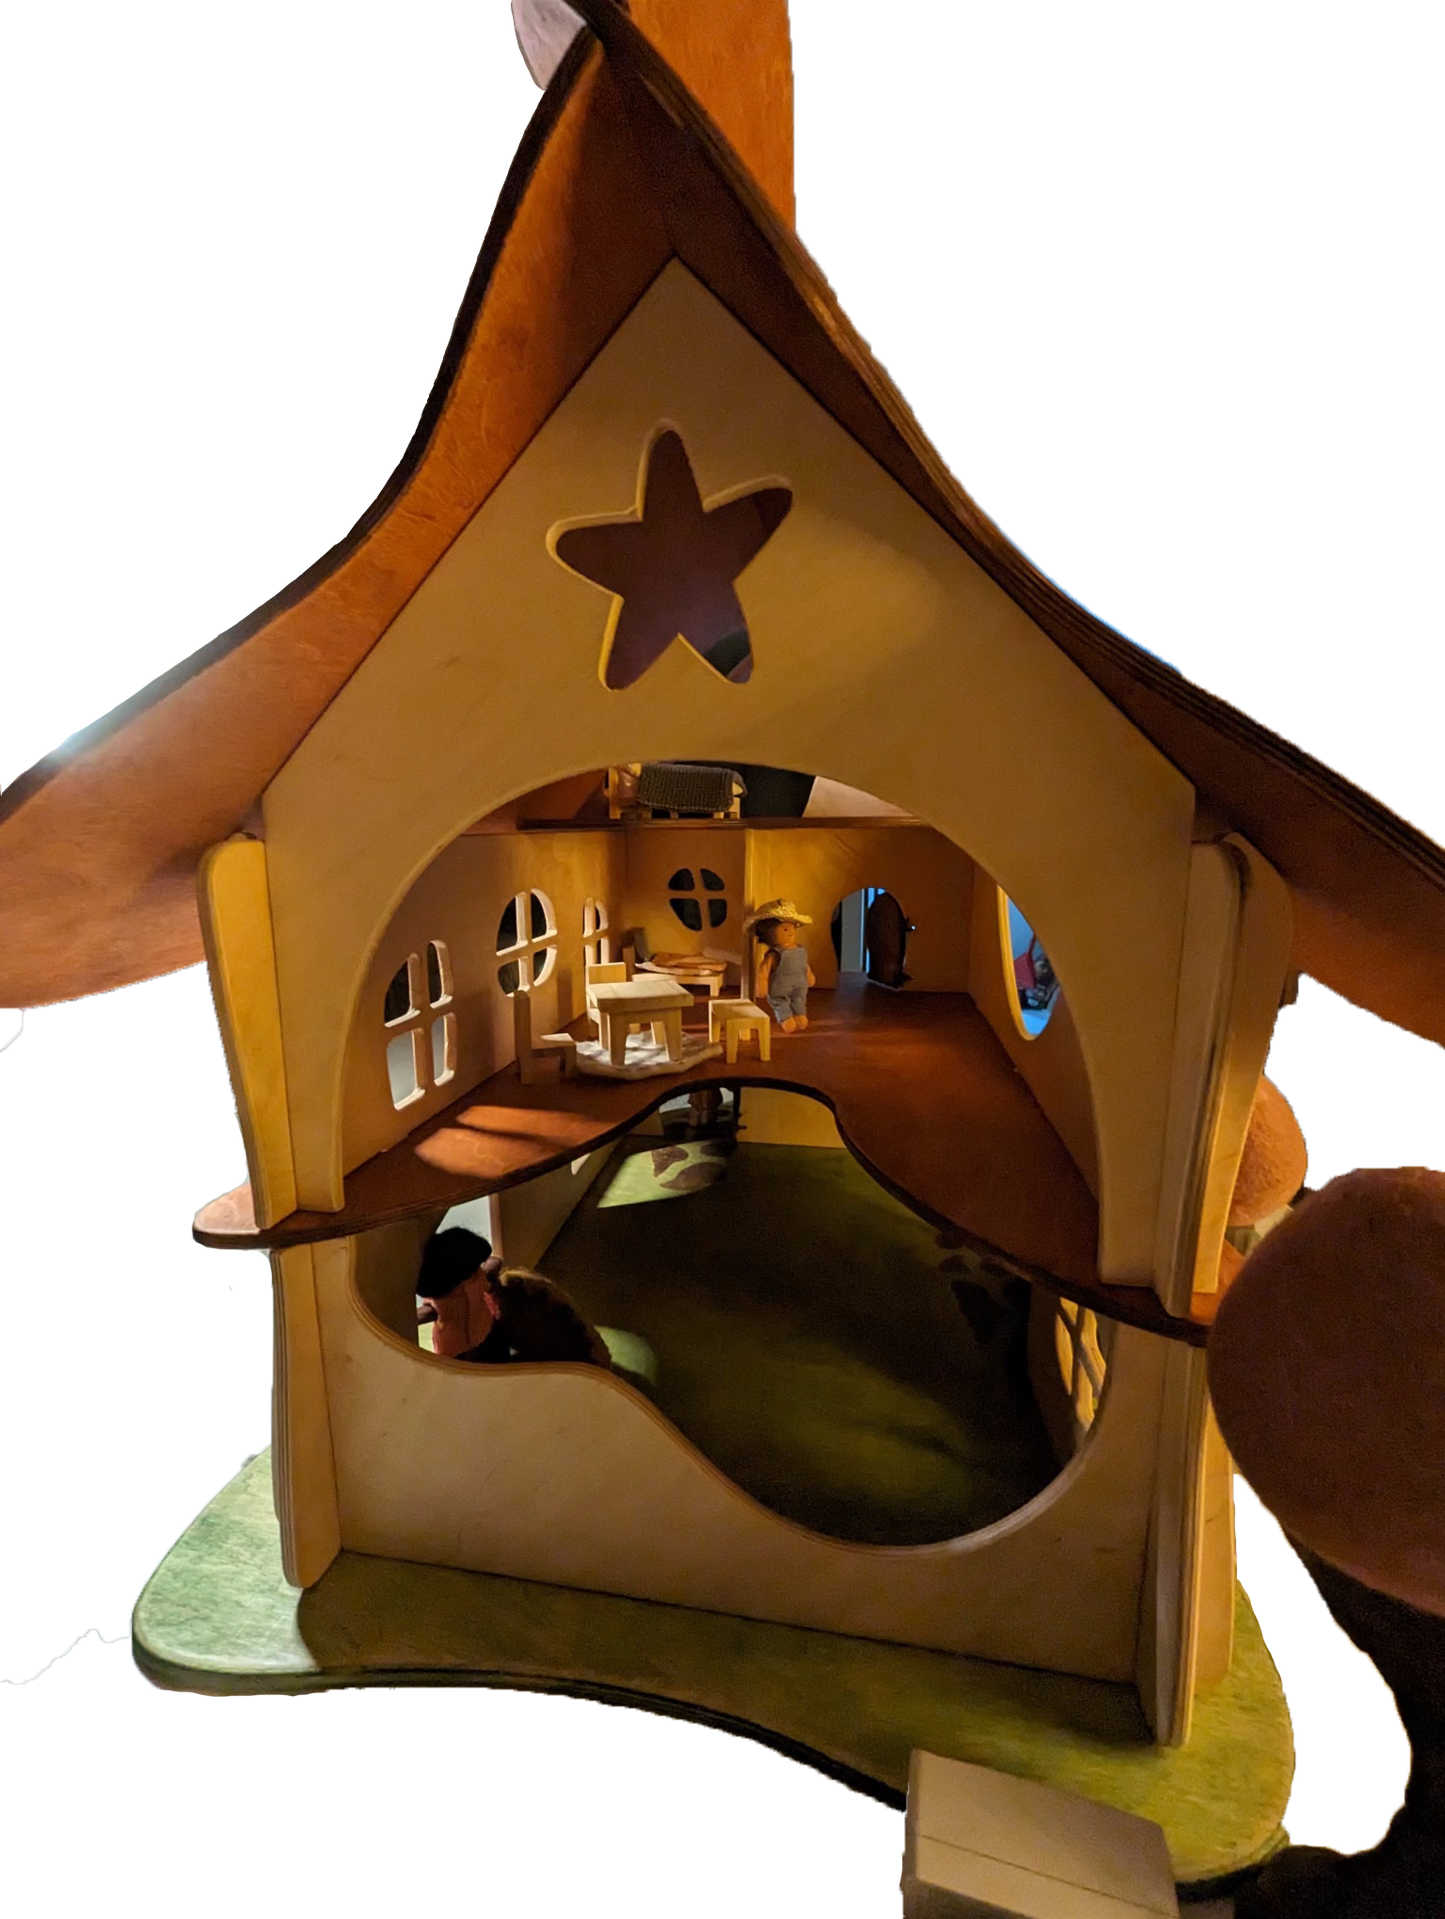 The Enchanting Twig Studio Large Waldorf-Style Wooden Dollhouse - Perfect for Imaginative Play!